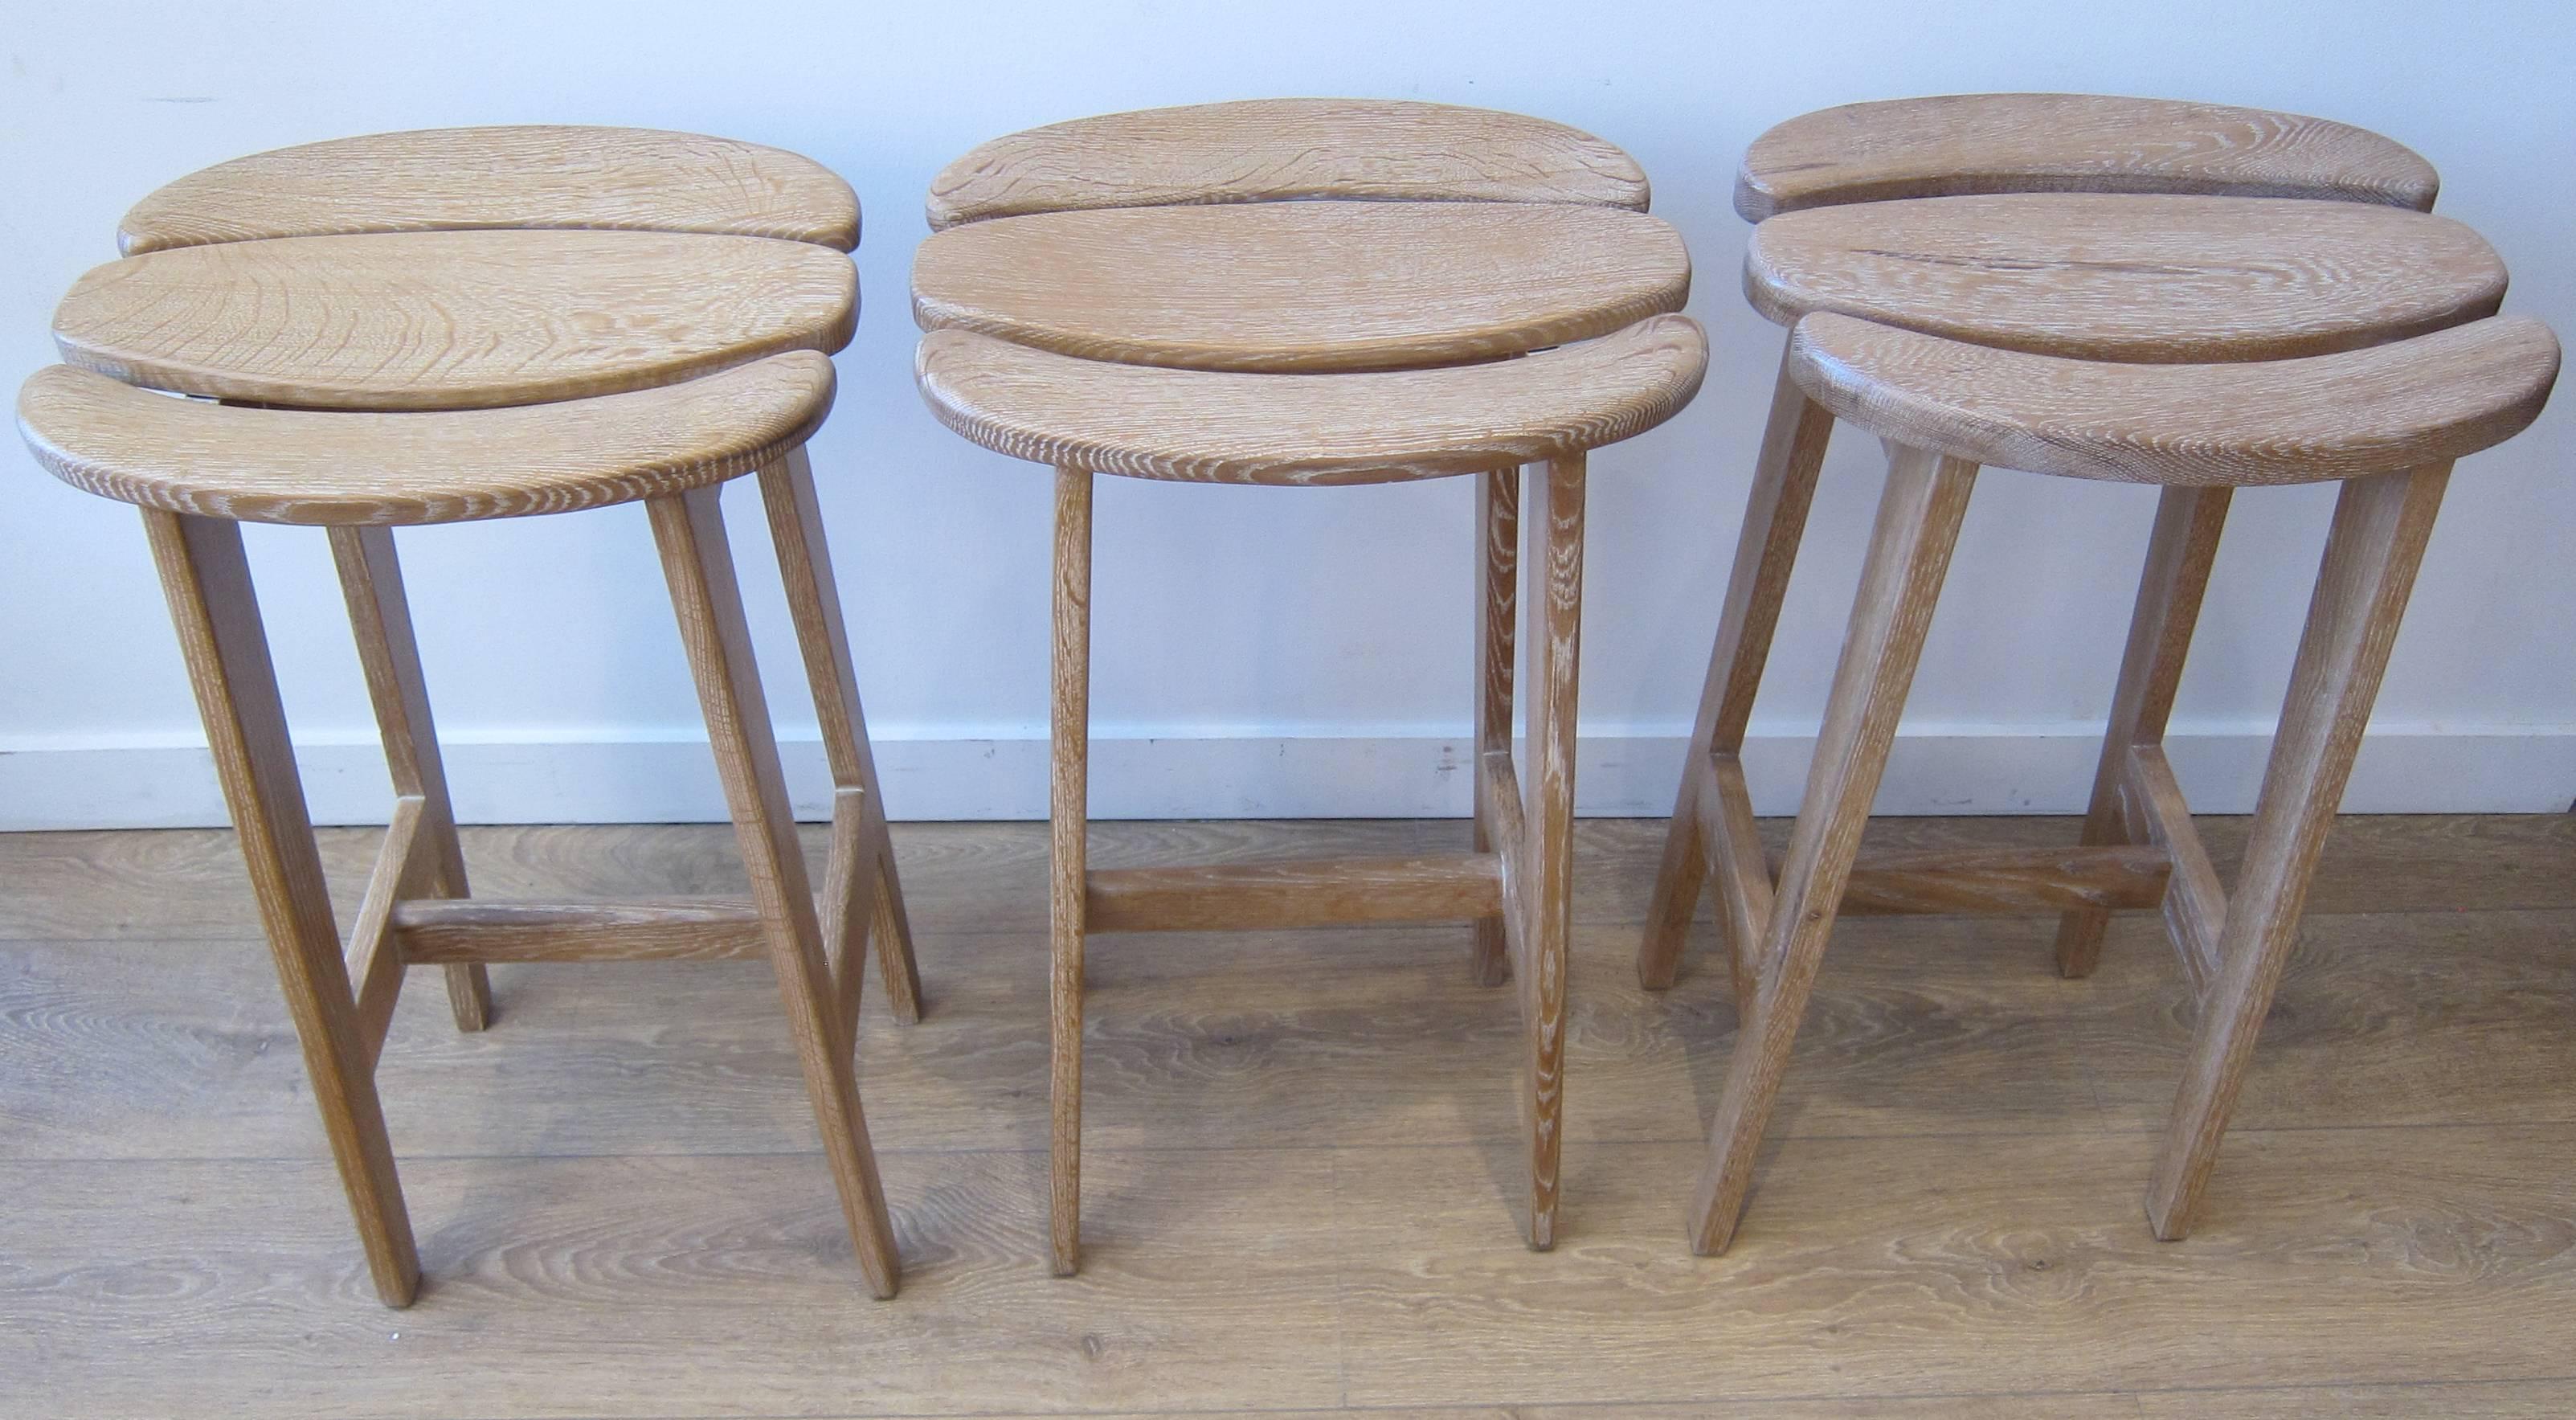 1950s cerused oak bar stools by Guillerme and Chambron for Votre Maison.